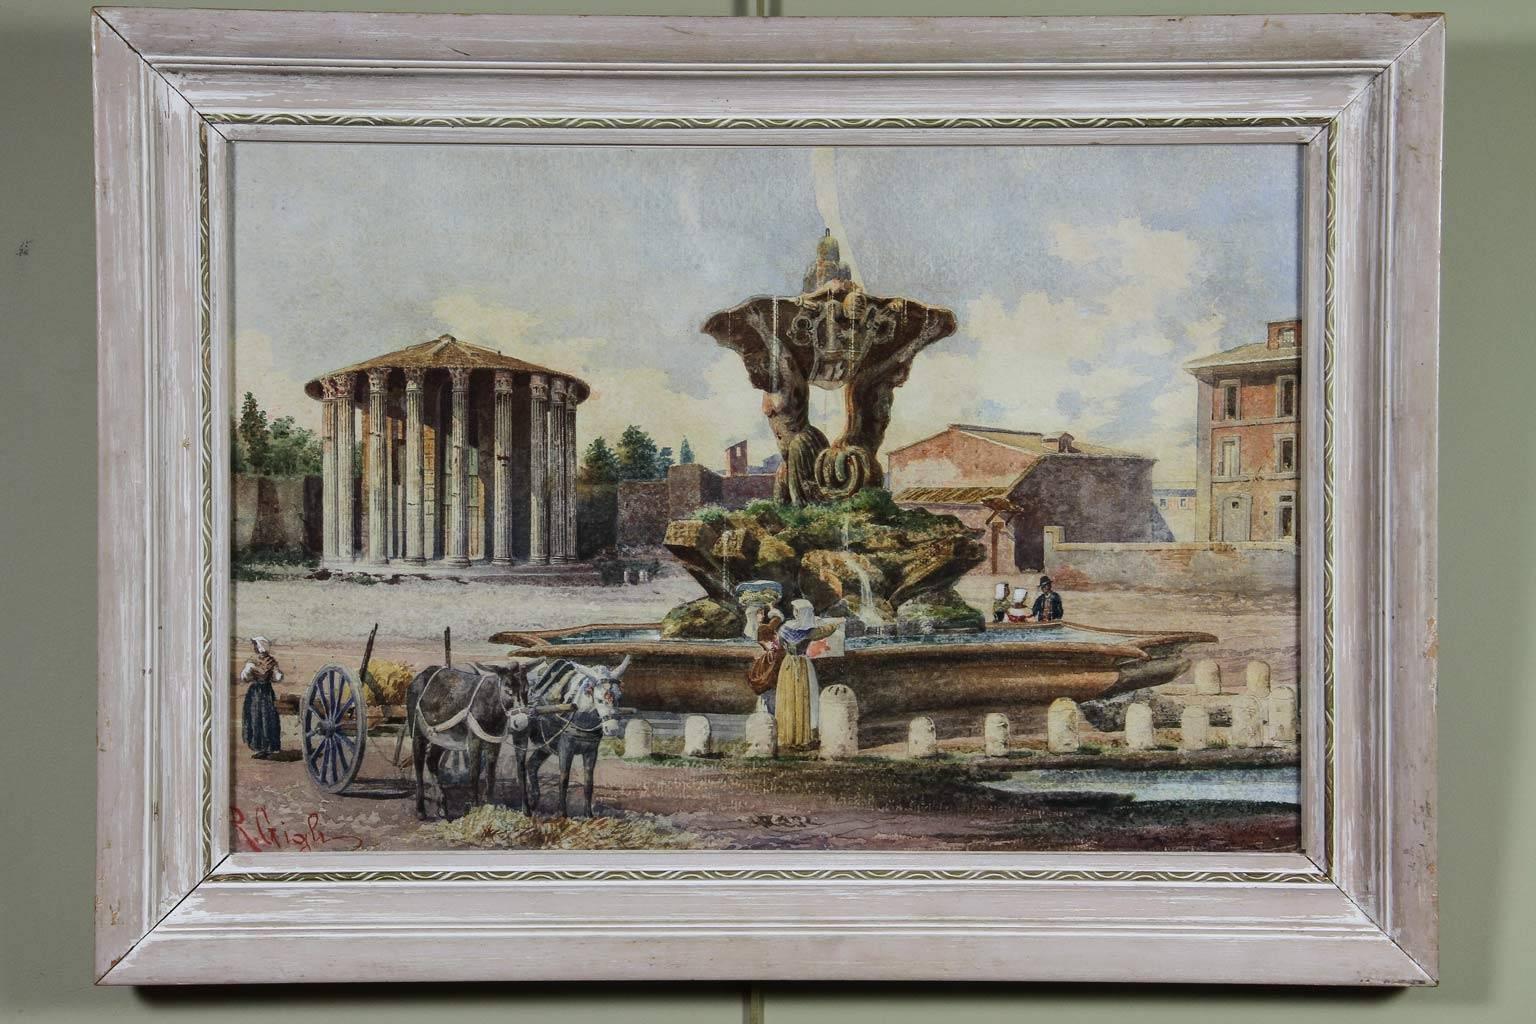 One of the Pantheon, another Vespasians Temple and The Temple of Hercules Victor. All signed by different artists.